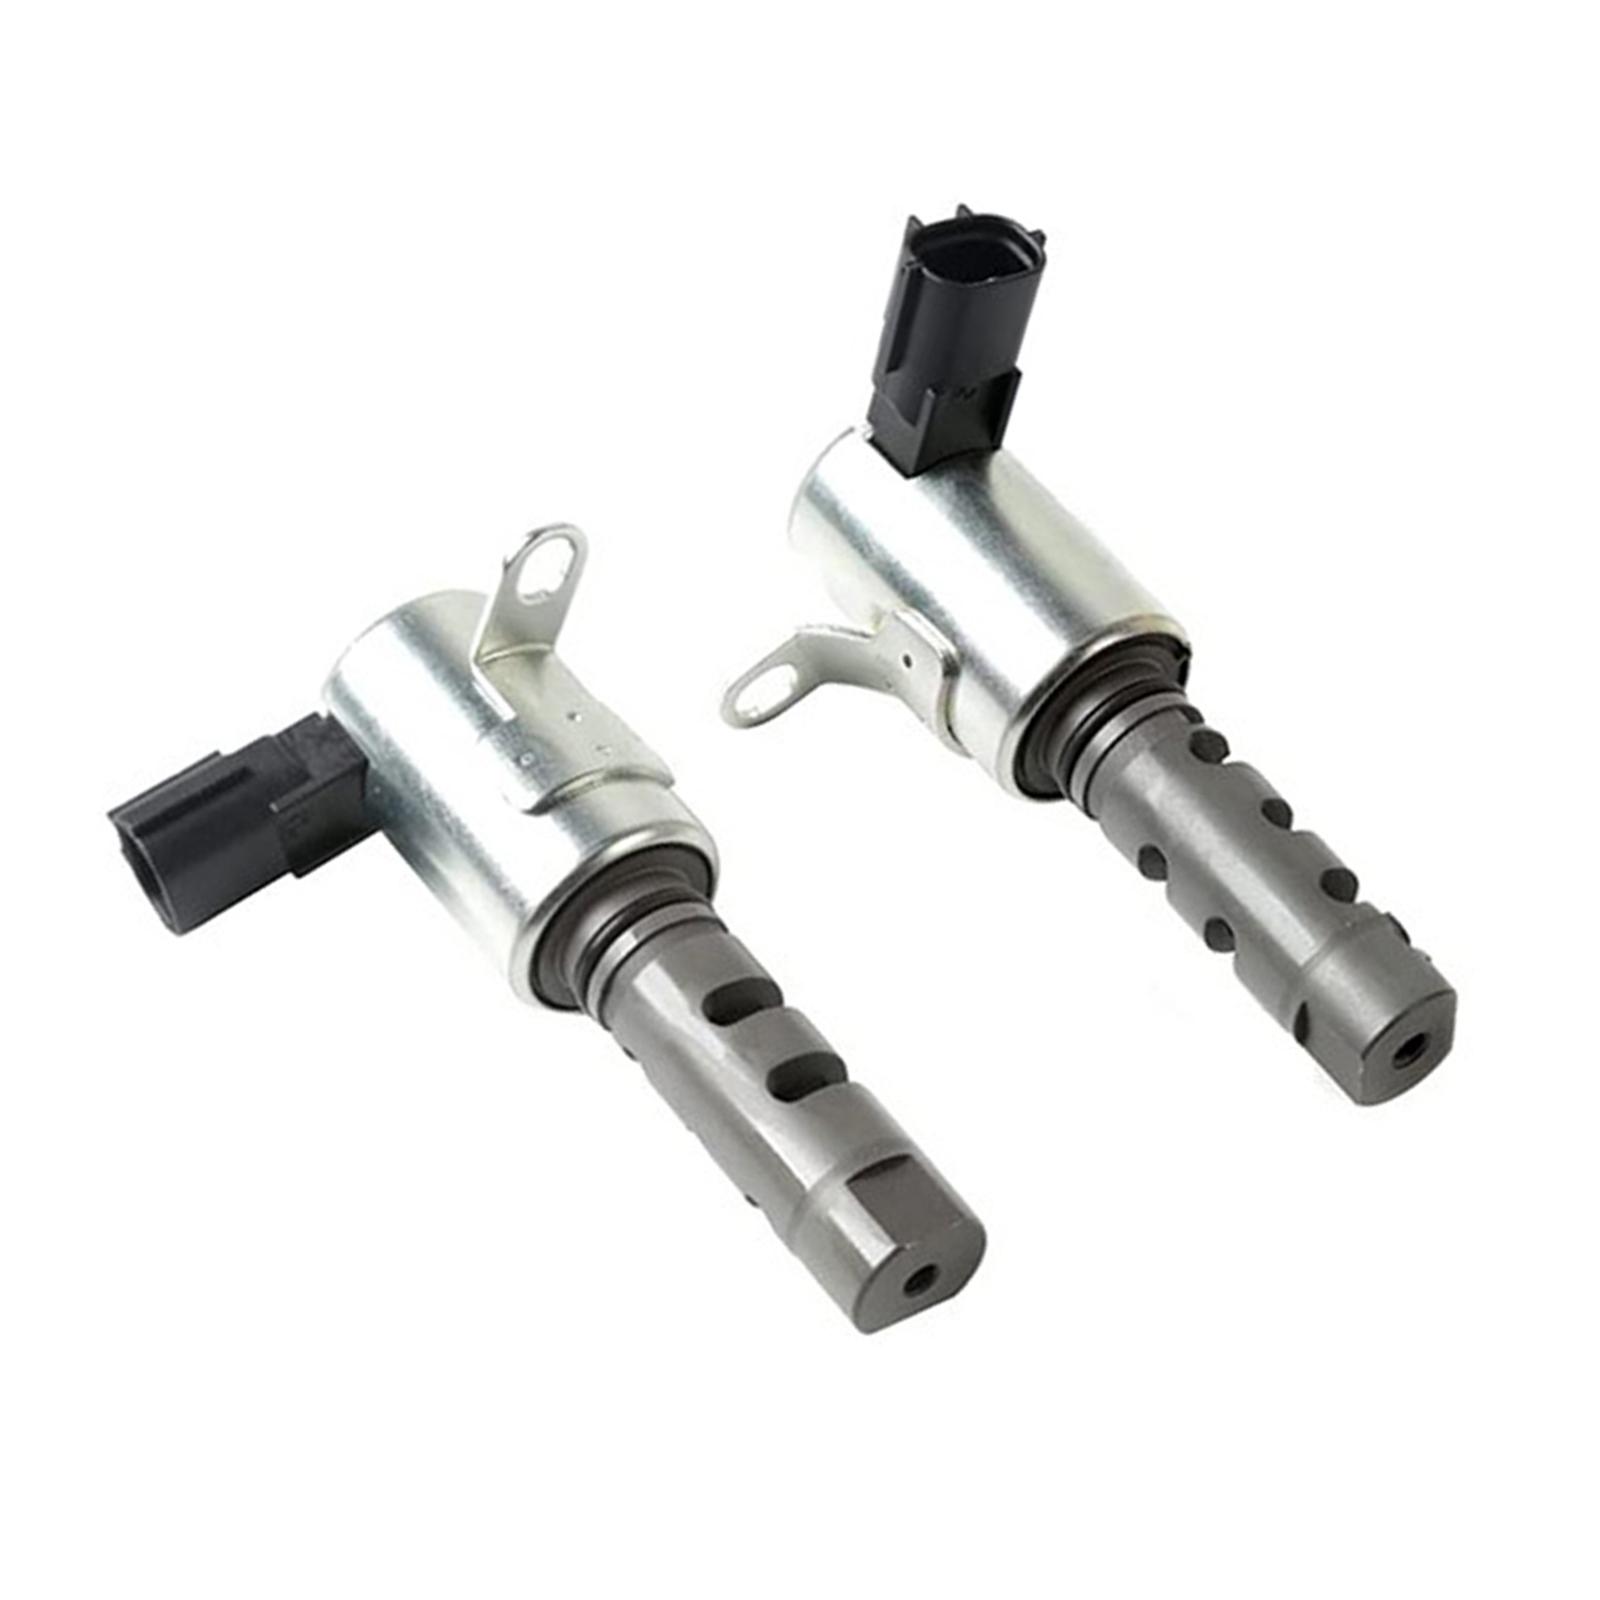 2Pcs Auto Vvt Valve Variable Timing Solenoid 15330-20010 for Toyota